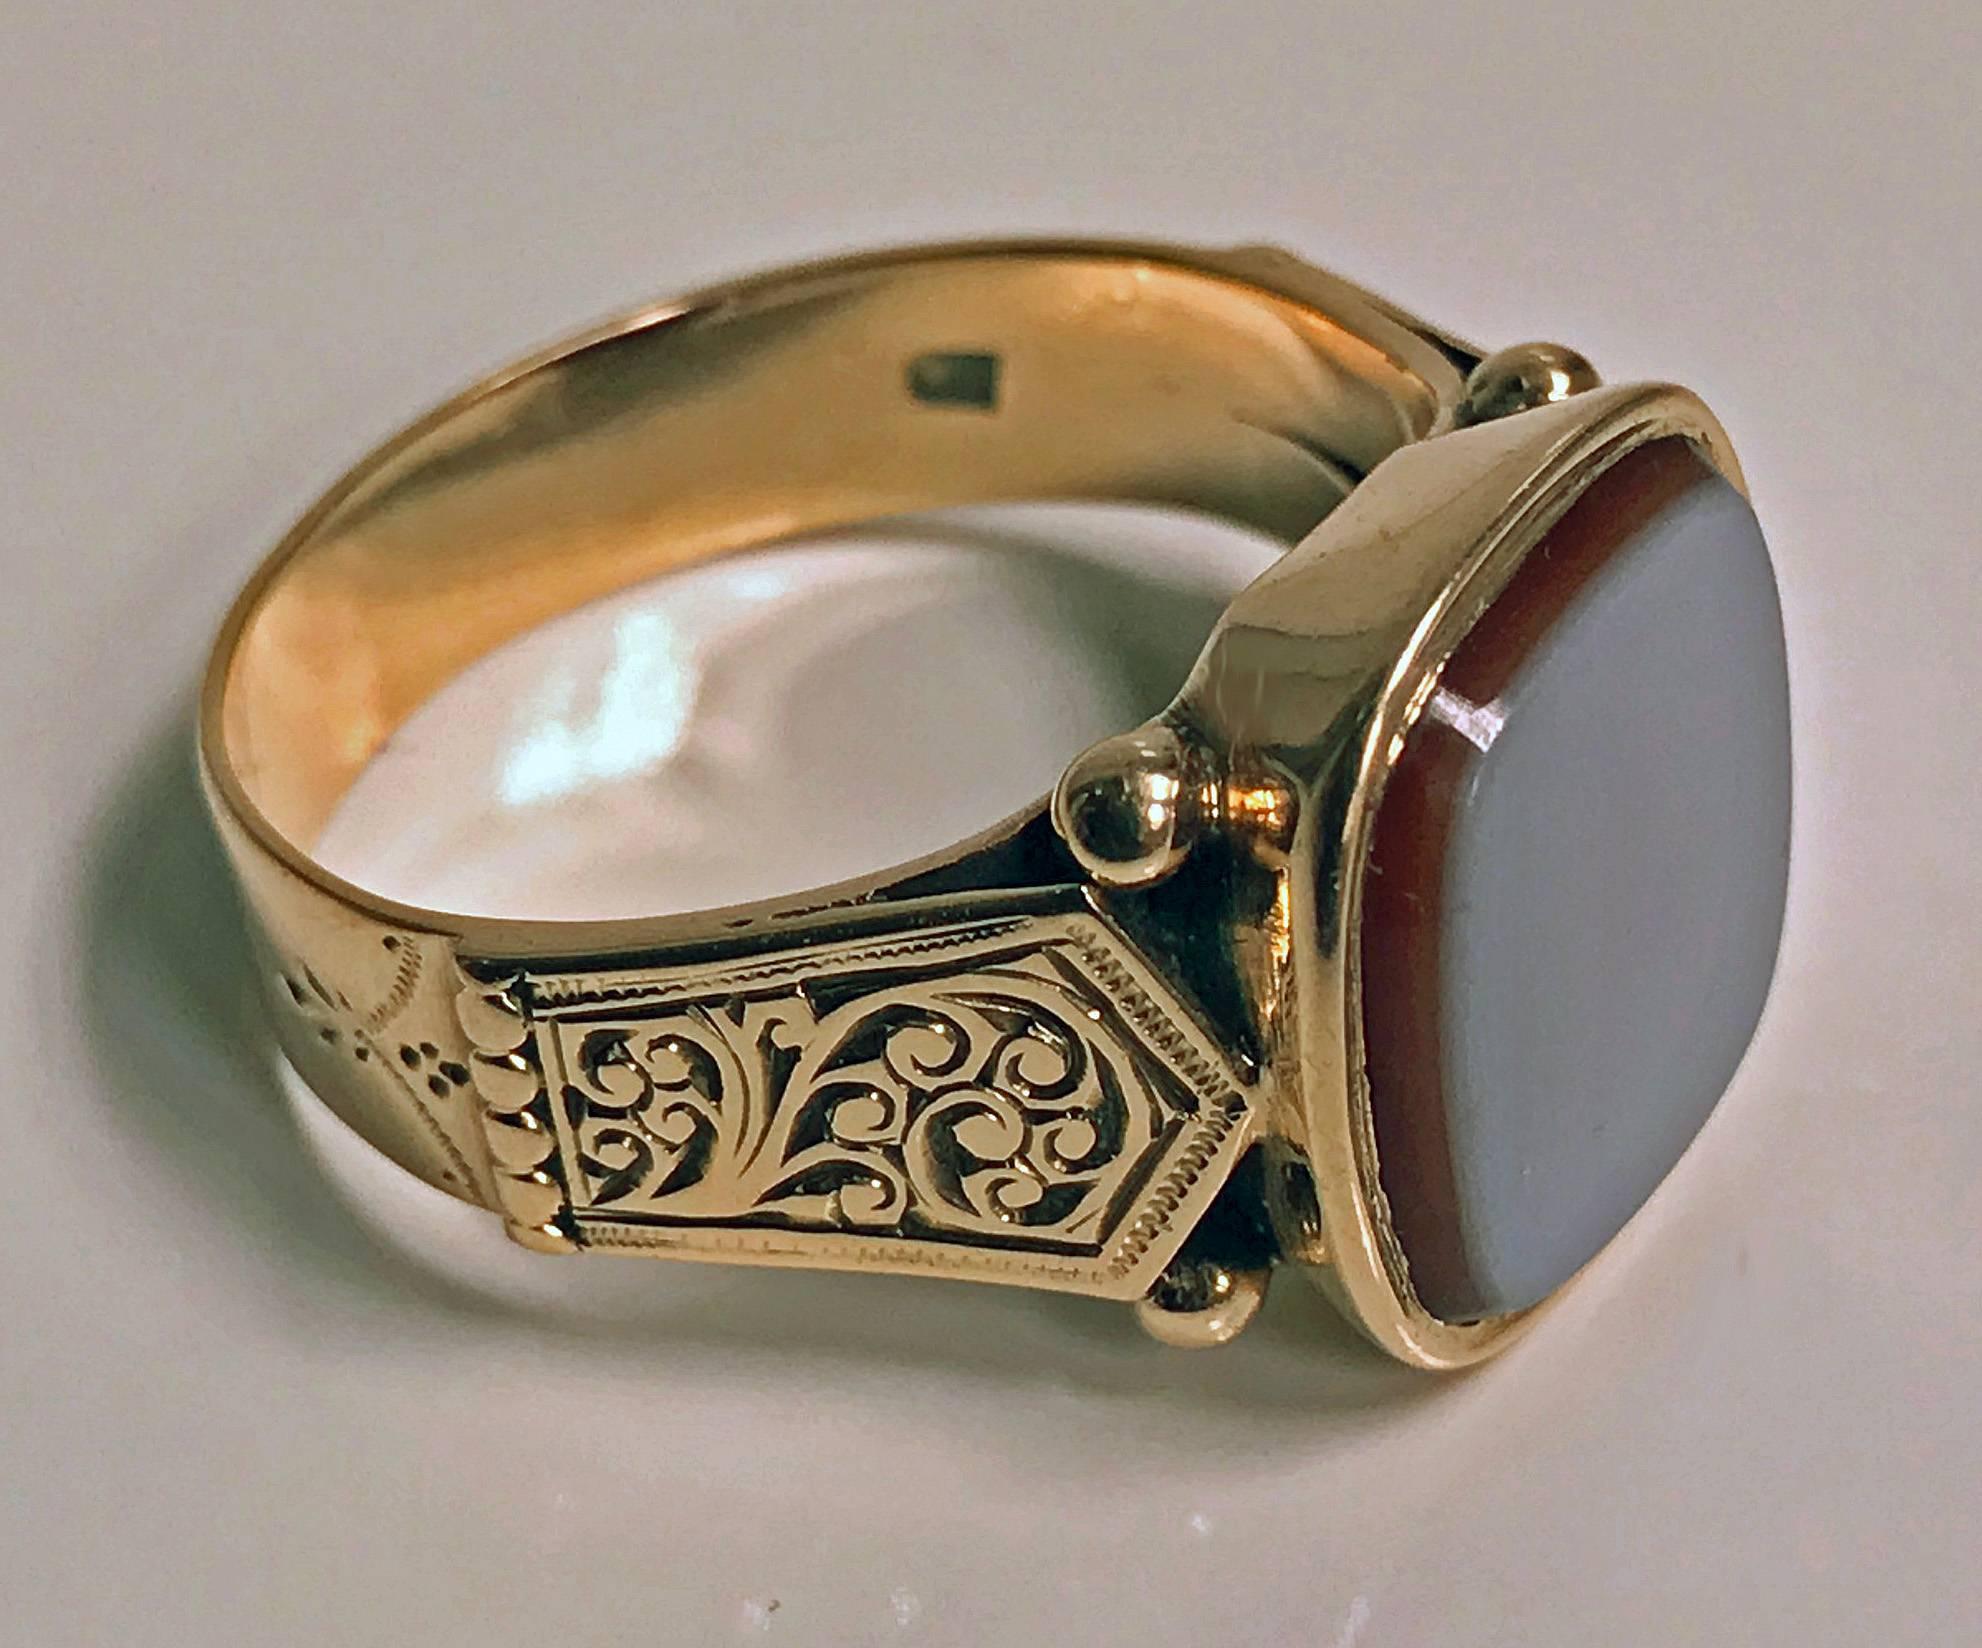 Antique Gold Gents Signet Ring, Sardonyx, Austria C.1890. Nice large size, un engraved sardonyx, approximately 14 mm cushion, finely carved shoulders, plain shank base. Stamped with Austrian marks for 14K Vienna. Ring Size: 10. May be sized. Item